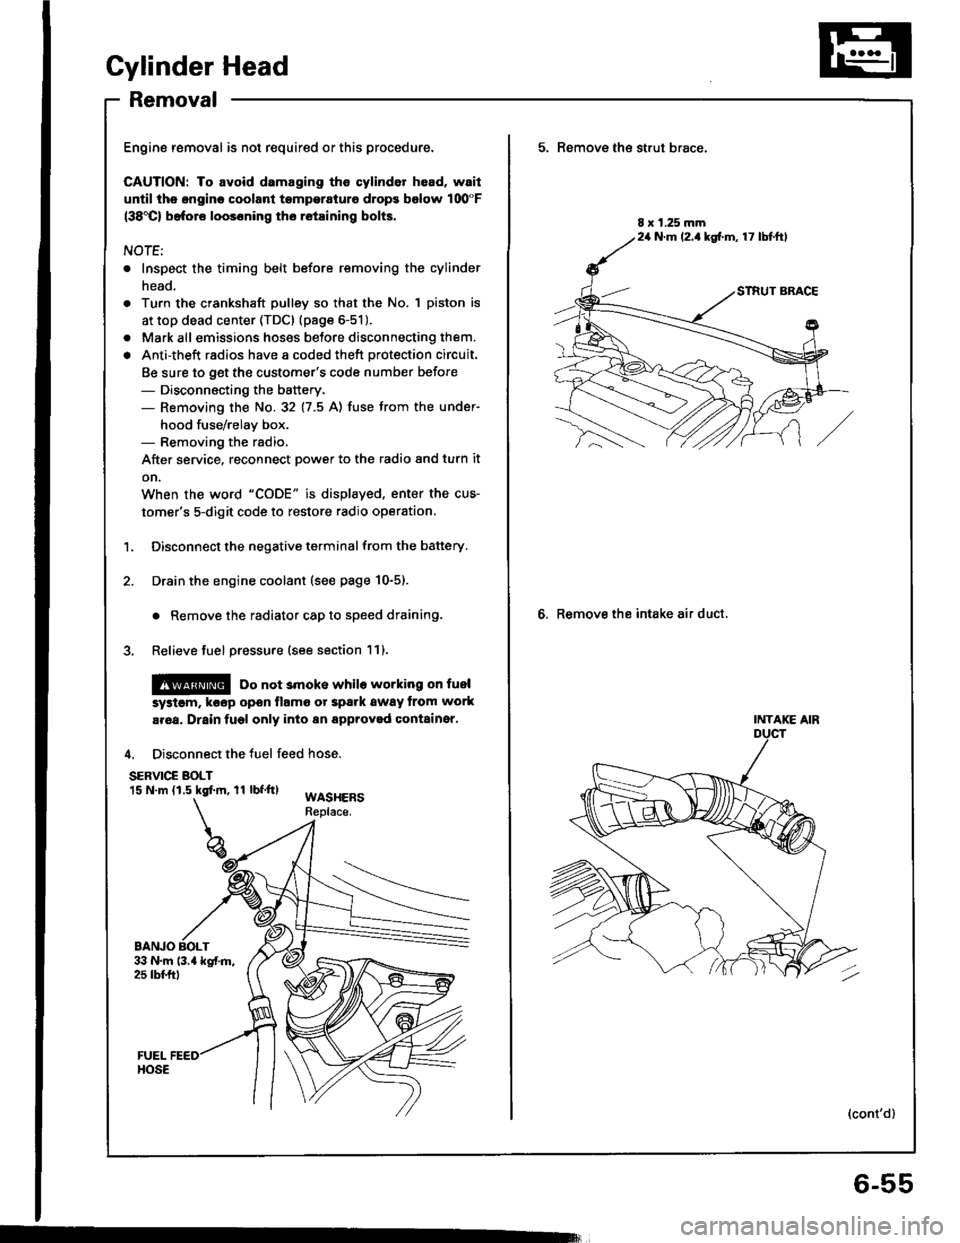 HONDA INTEGRA 1994 4.G Workshop Manual Cylinder Head
Removal
Engine removal is not required or this procedure.
CAUTION: To avoid damaging tho cylinder head, wail
u[tilths.nginc coolant tsmperaturo drops bolow 100"F(38Cl bafore loos6ning t